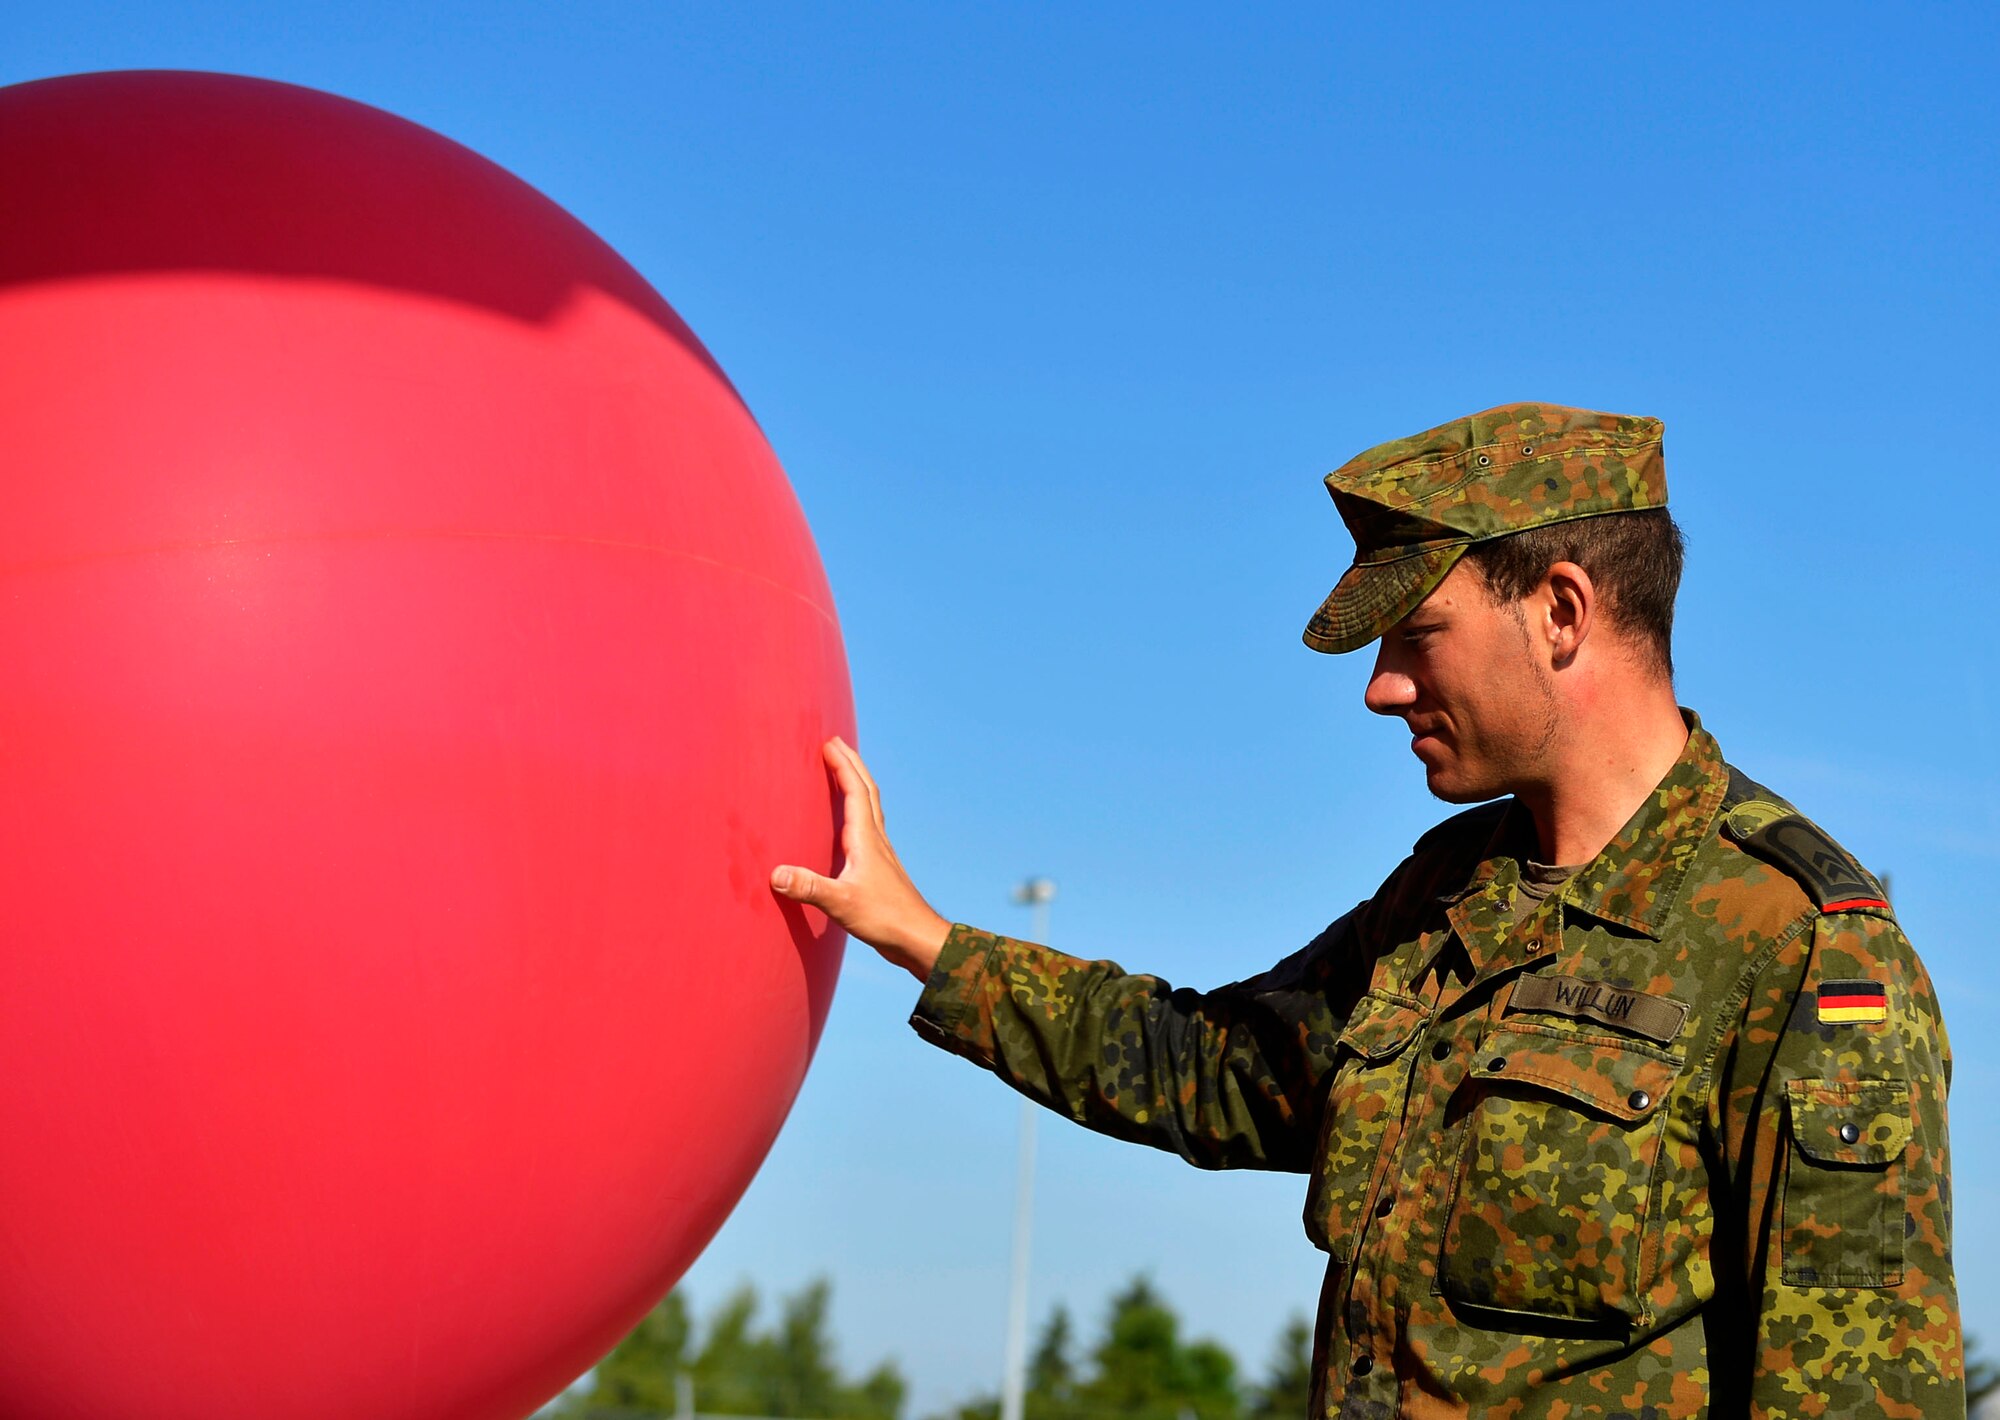 German Army Sergeant Joern Willun, a weather observer, prepares a weather balloon for launch at McCully Barracks, Germany, June 15, 2017. Ramstein’s 7th Weather Squadron invited NATO allies from Germany, Poland, and Hungary to participate in Exercise Cadre Focus 17-1, which the squadron uses to enhance cooperation while testing its capabilities. (U.S. Air Force photo by Airman 1st Class Joshua Magbanua)